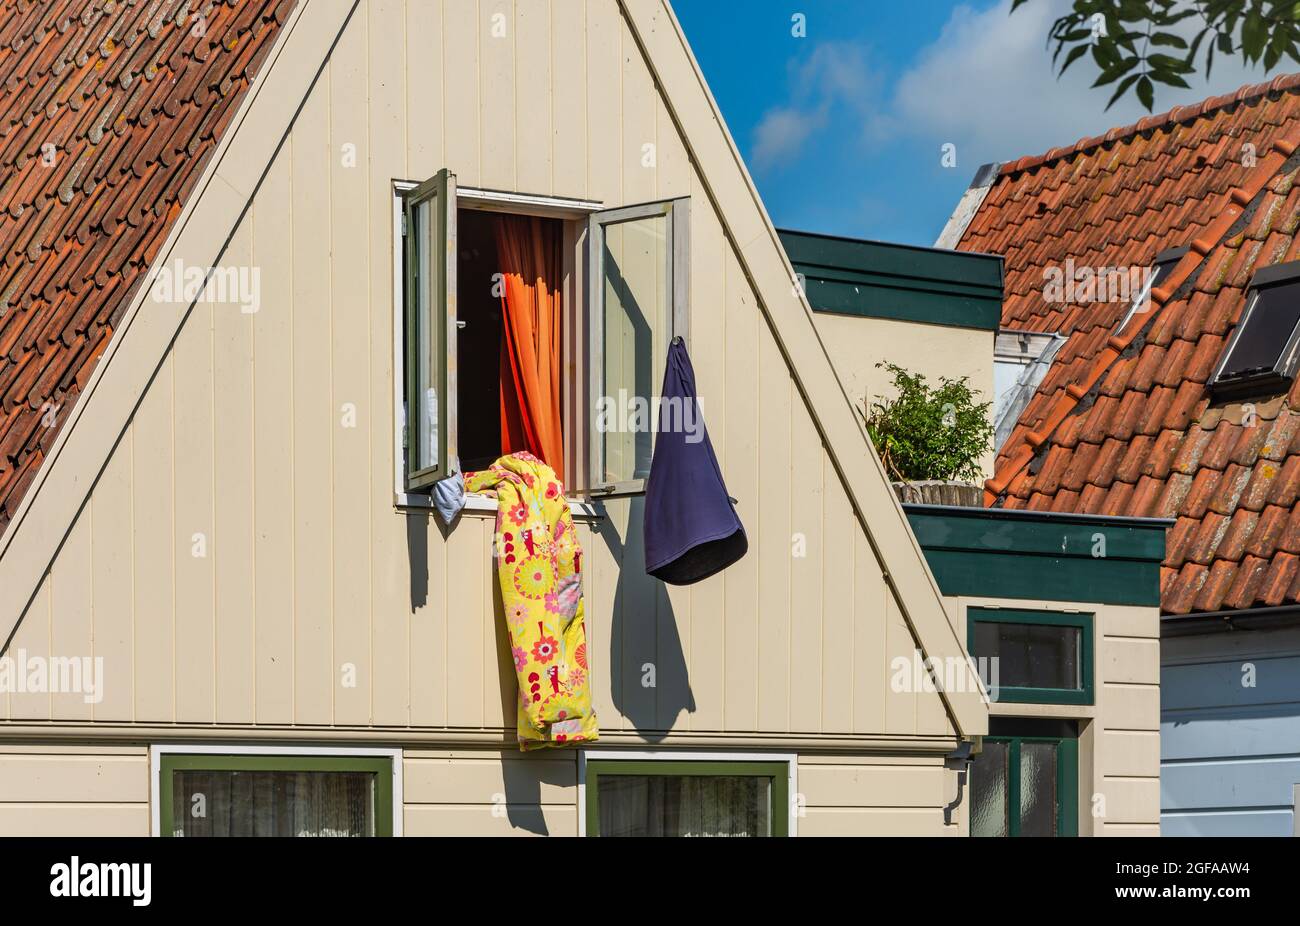 Colorful blanket hanging out of the window of the dutch house, bed linen ventilating Stock Photo